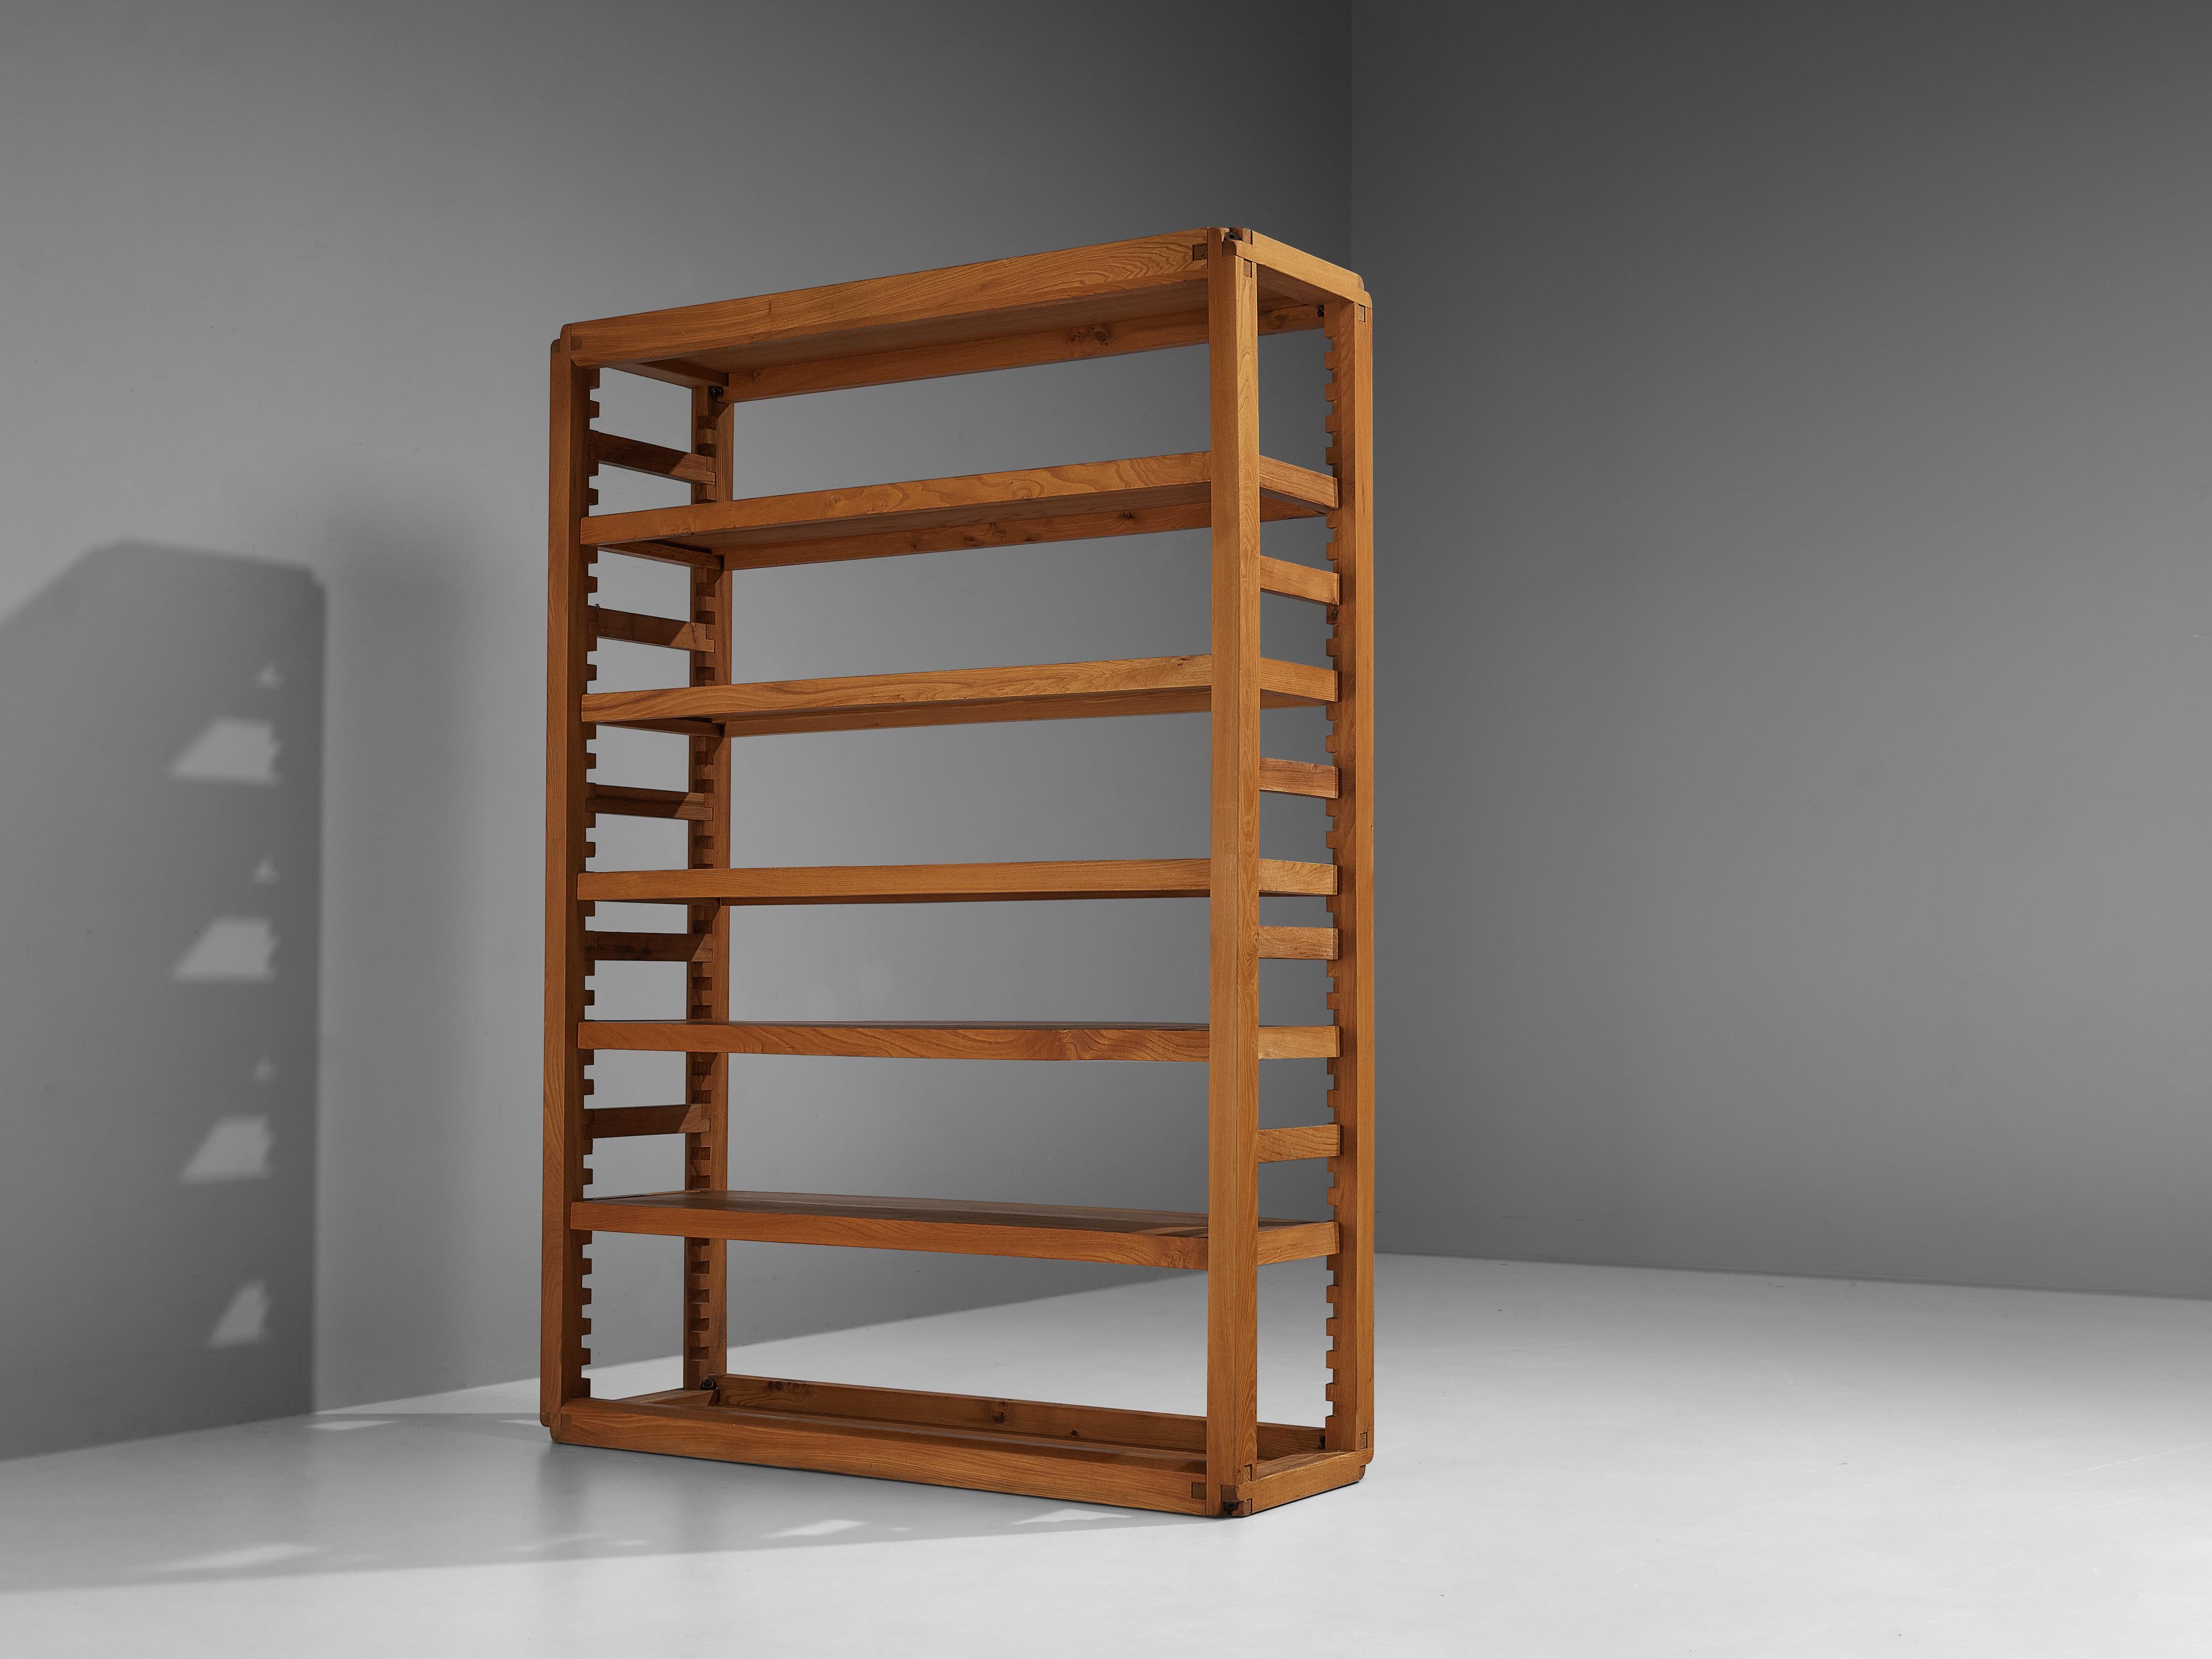 Pierre Chapo, bookcase, elm, France, 1960s

This versatile shelve is designed by Pierre Chapo. The shelving system was created in the 1960s. This robust and solid bookcase consists an open shelving that provides storage. Chapo's great eye for